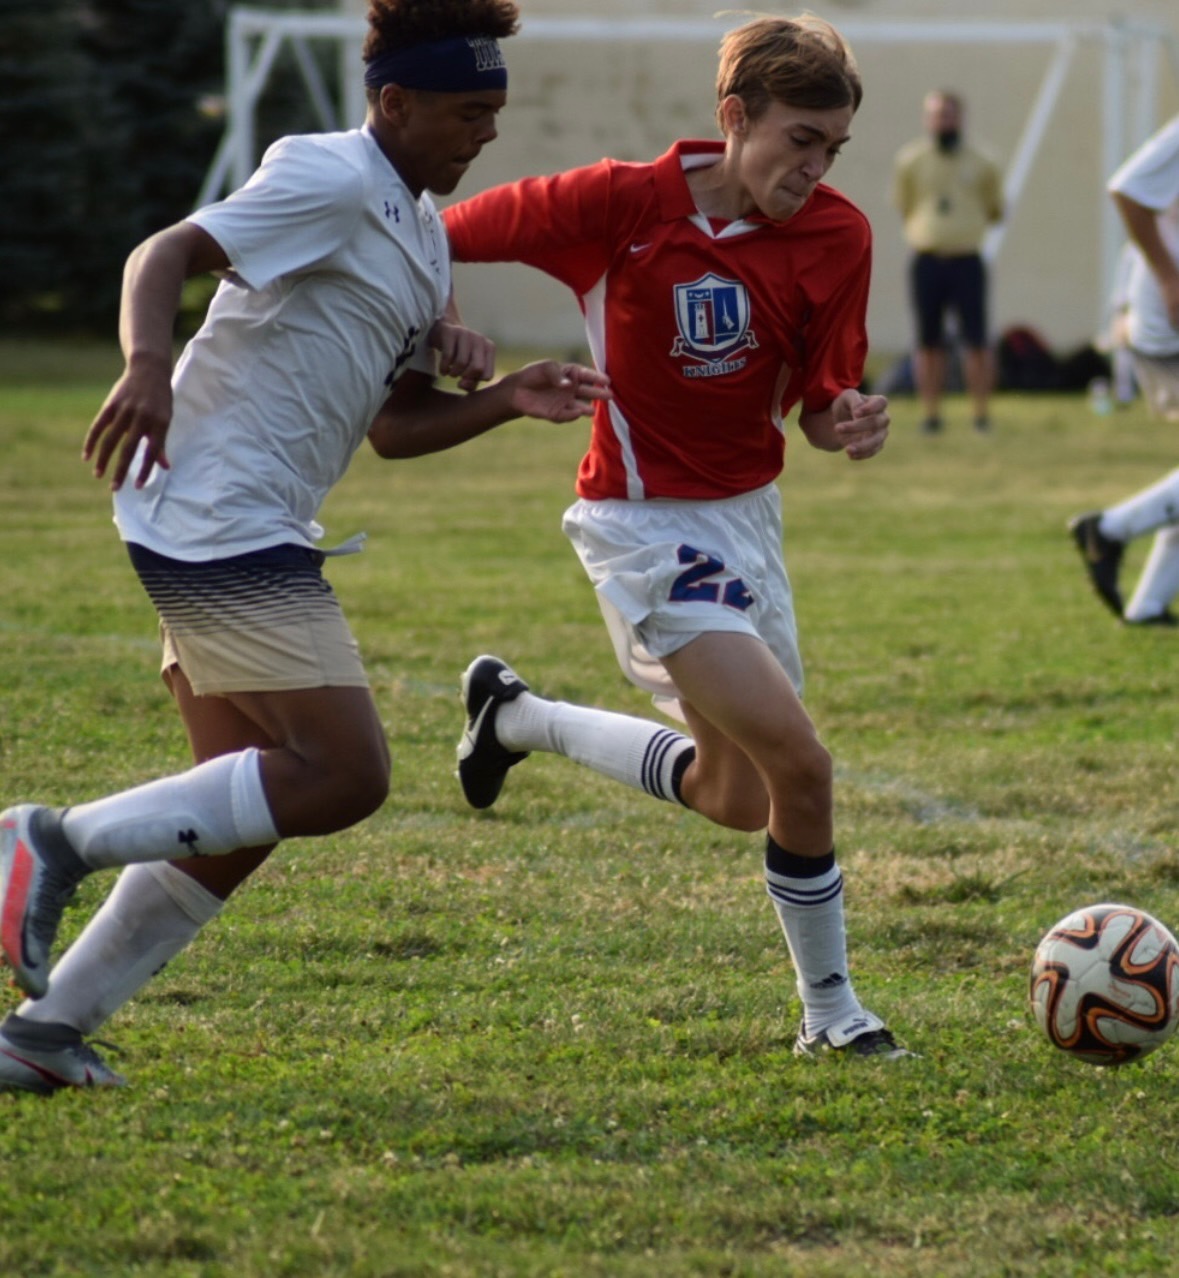 A band student playing soccer, about to kick the ball.